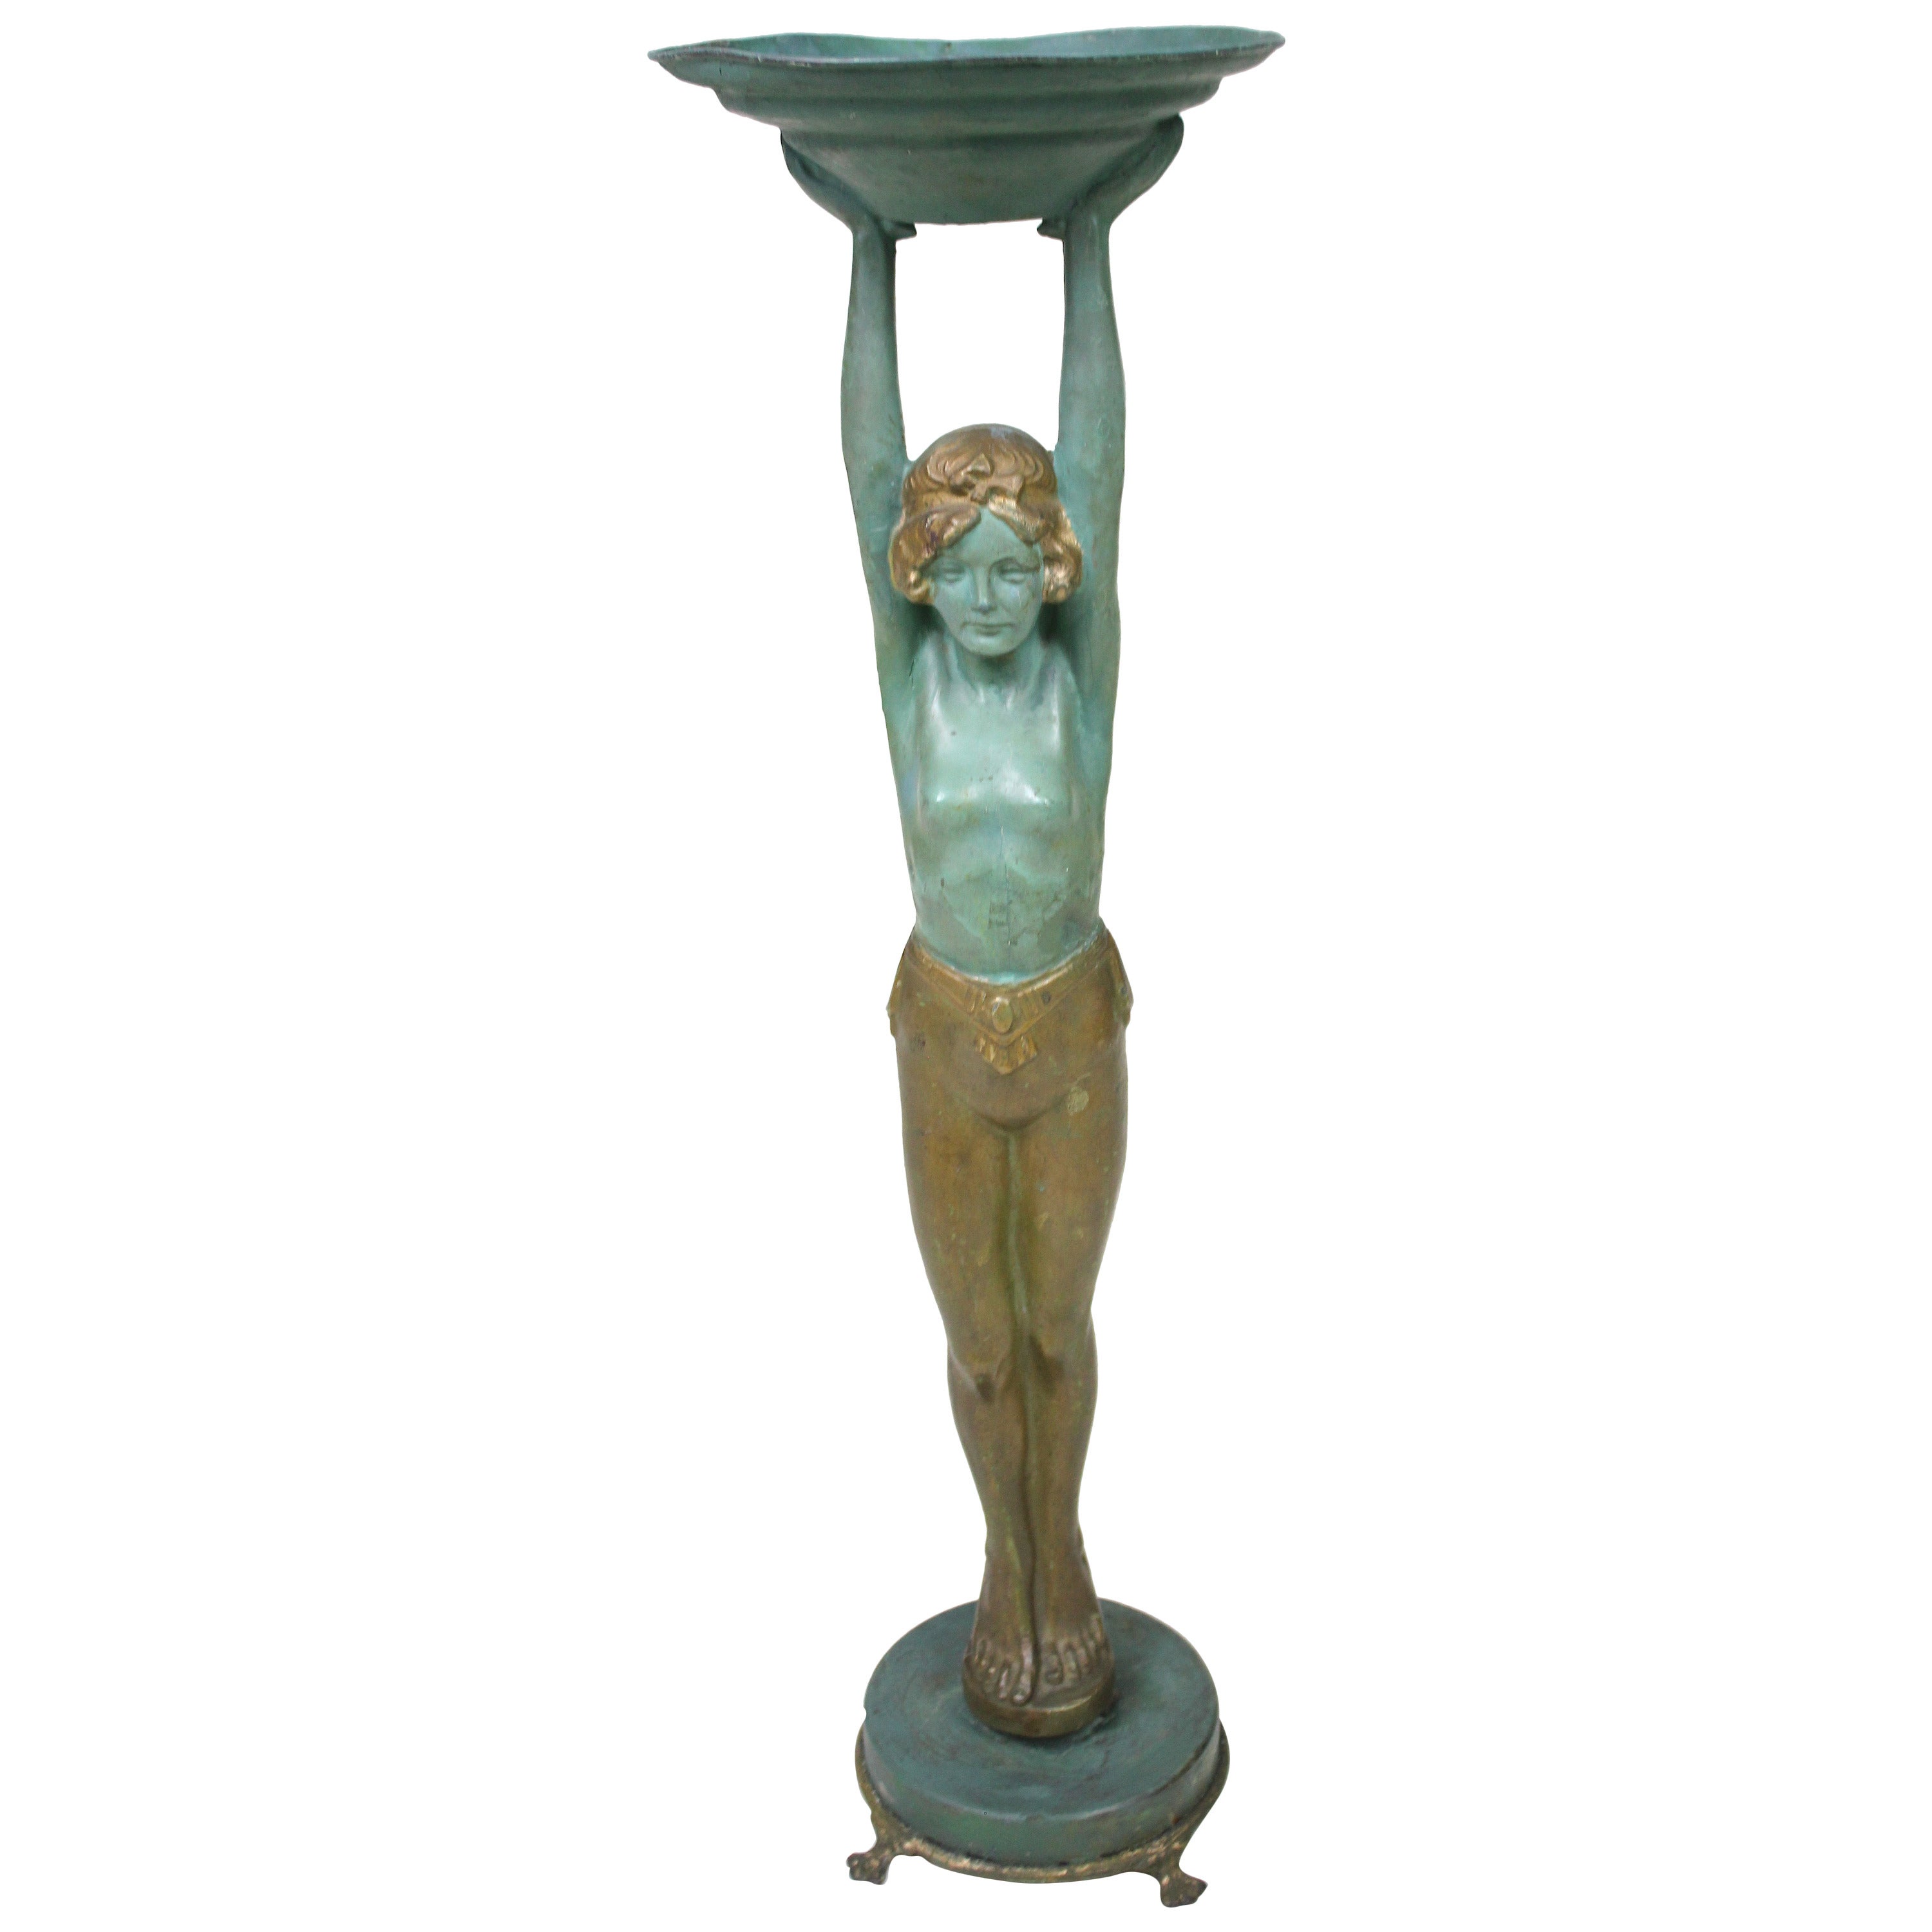 Art Deco Lady Statue in the Manner of Max Le Verrier by Everlite N.Y., 1930 For Sale